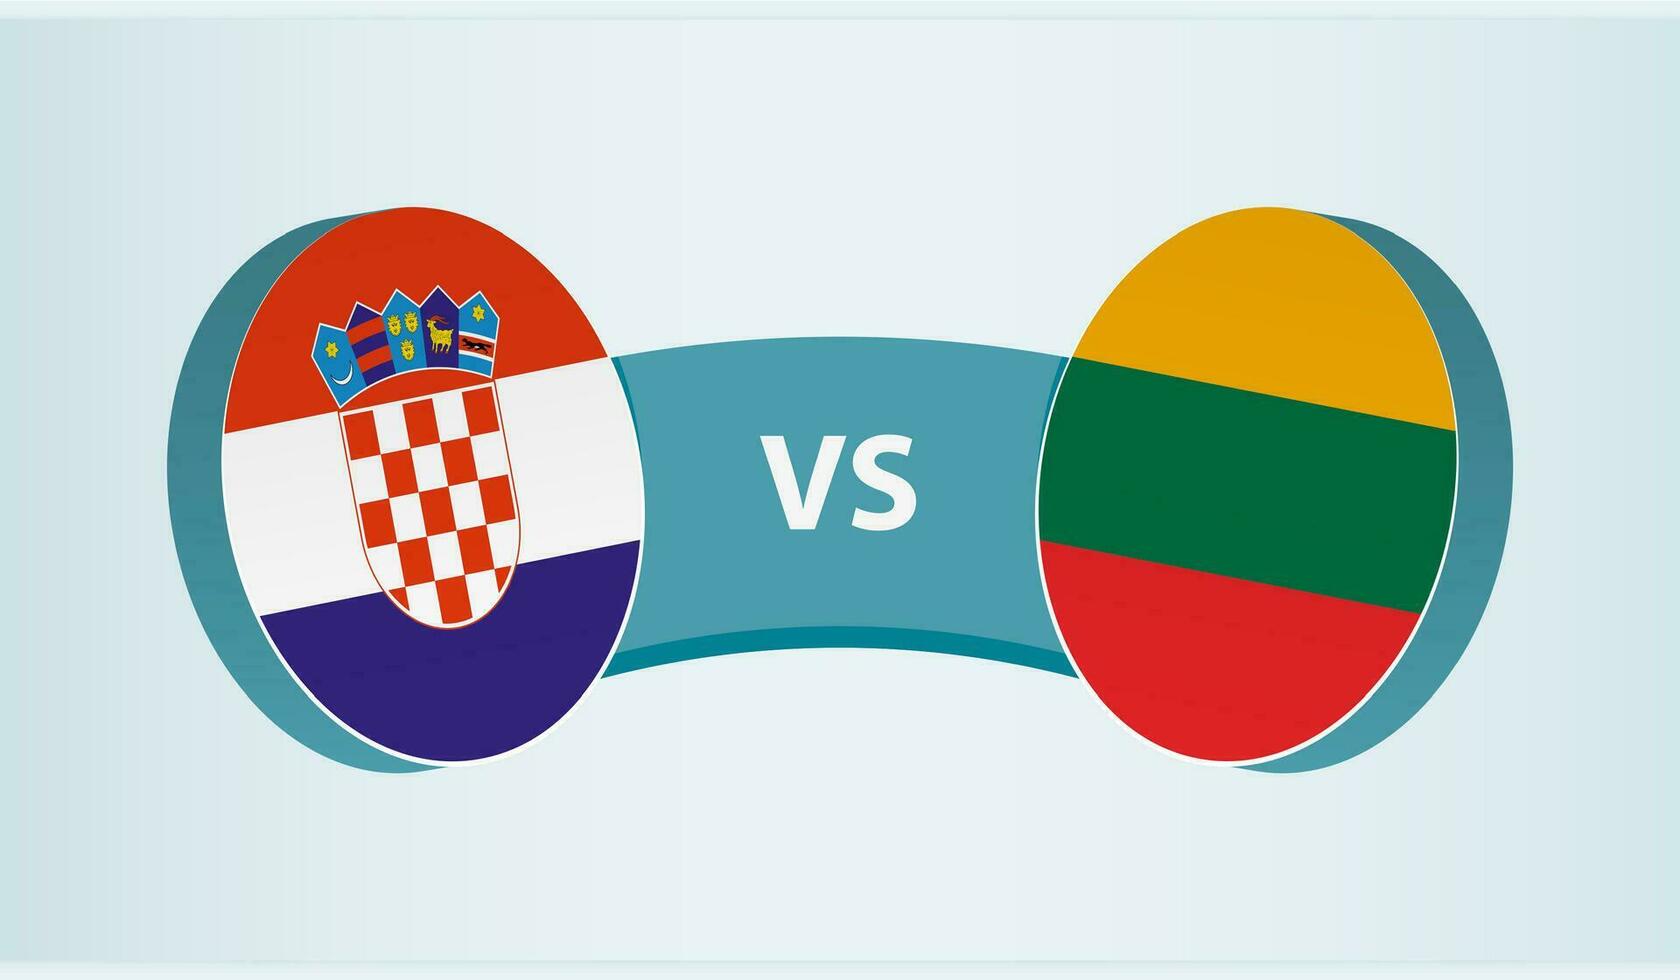 Croatia versus Lithuania, team sports competition concept. vector